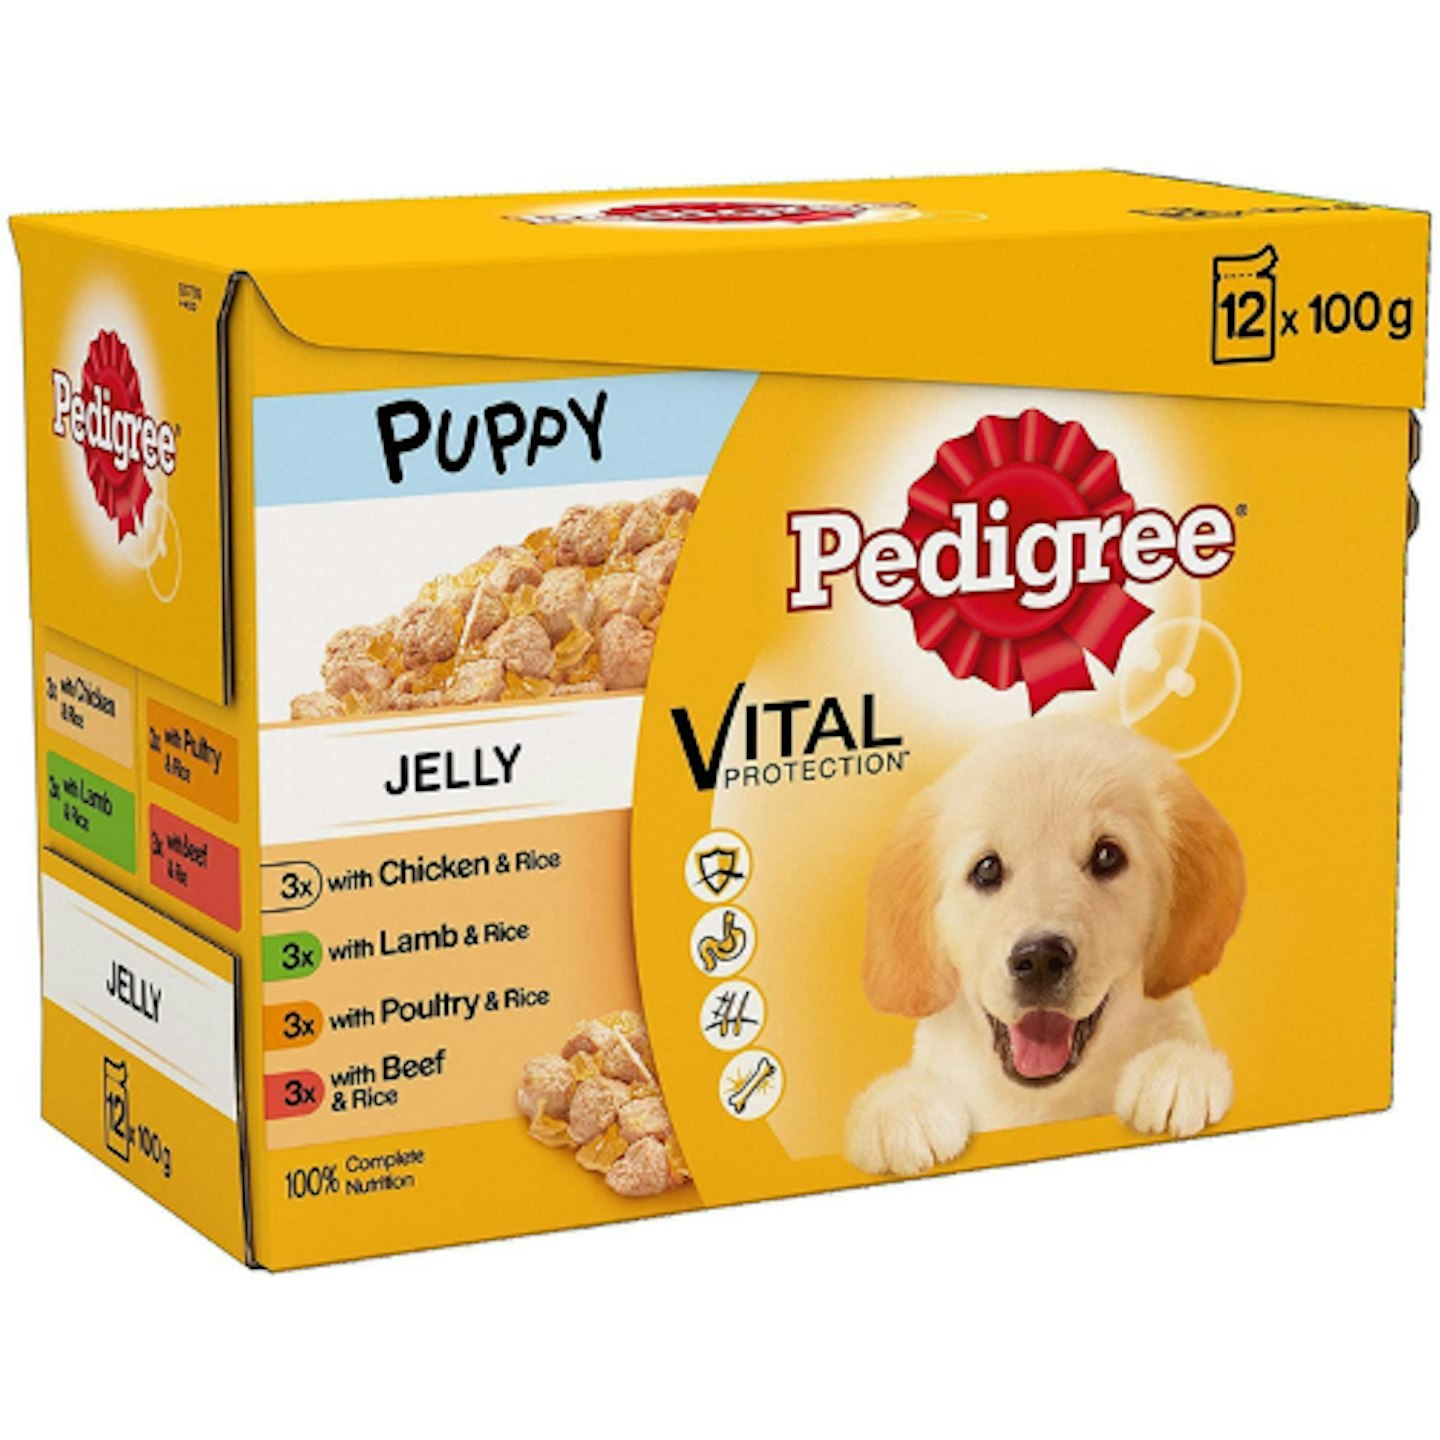 Puppy Food: Pedigree Junior Wet Dog Food for Young Dogs and Puppies